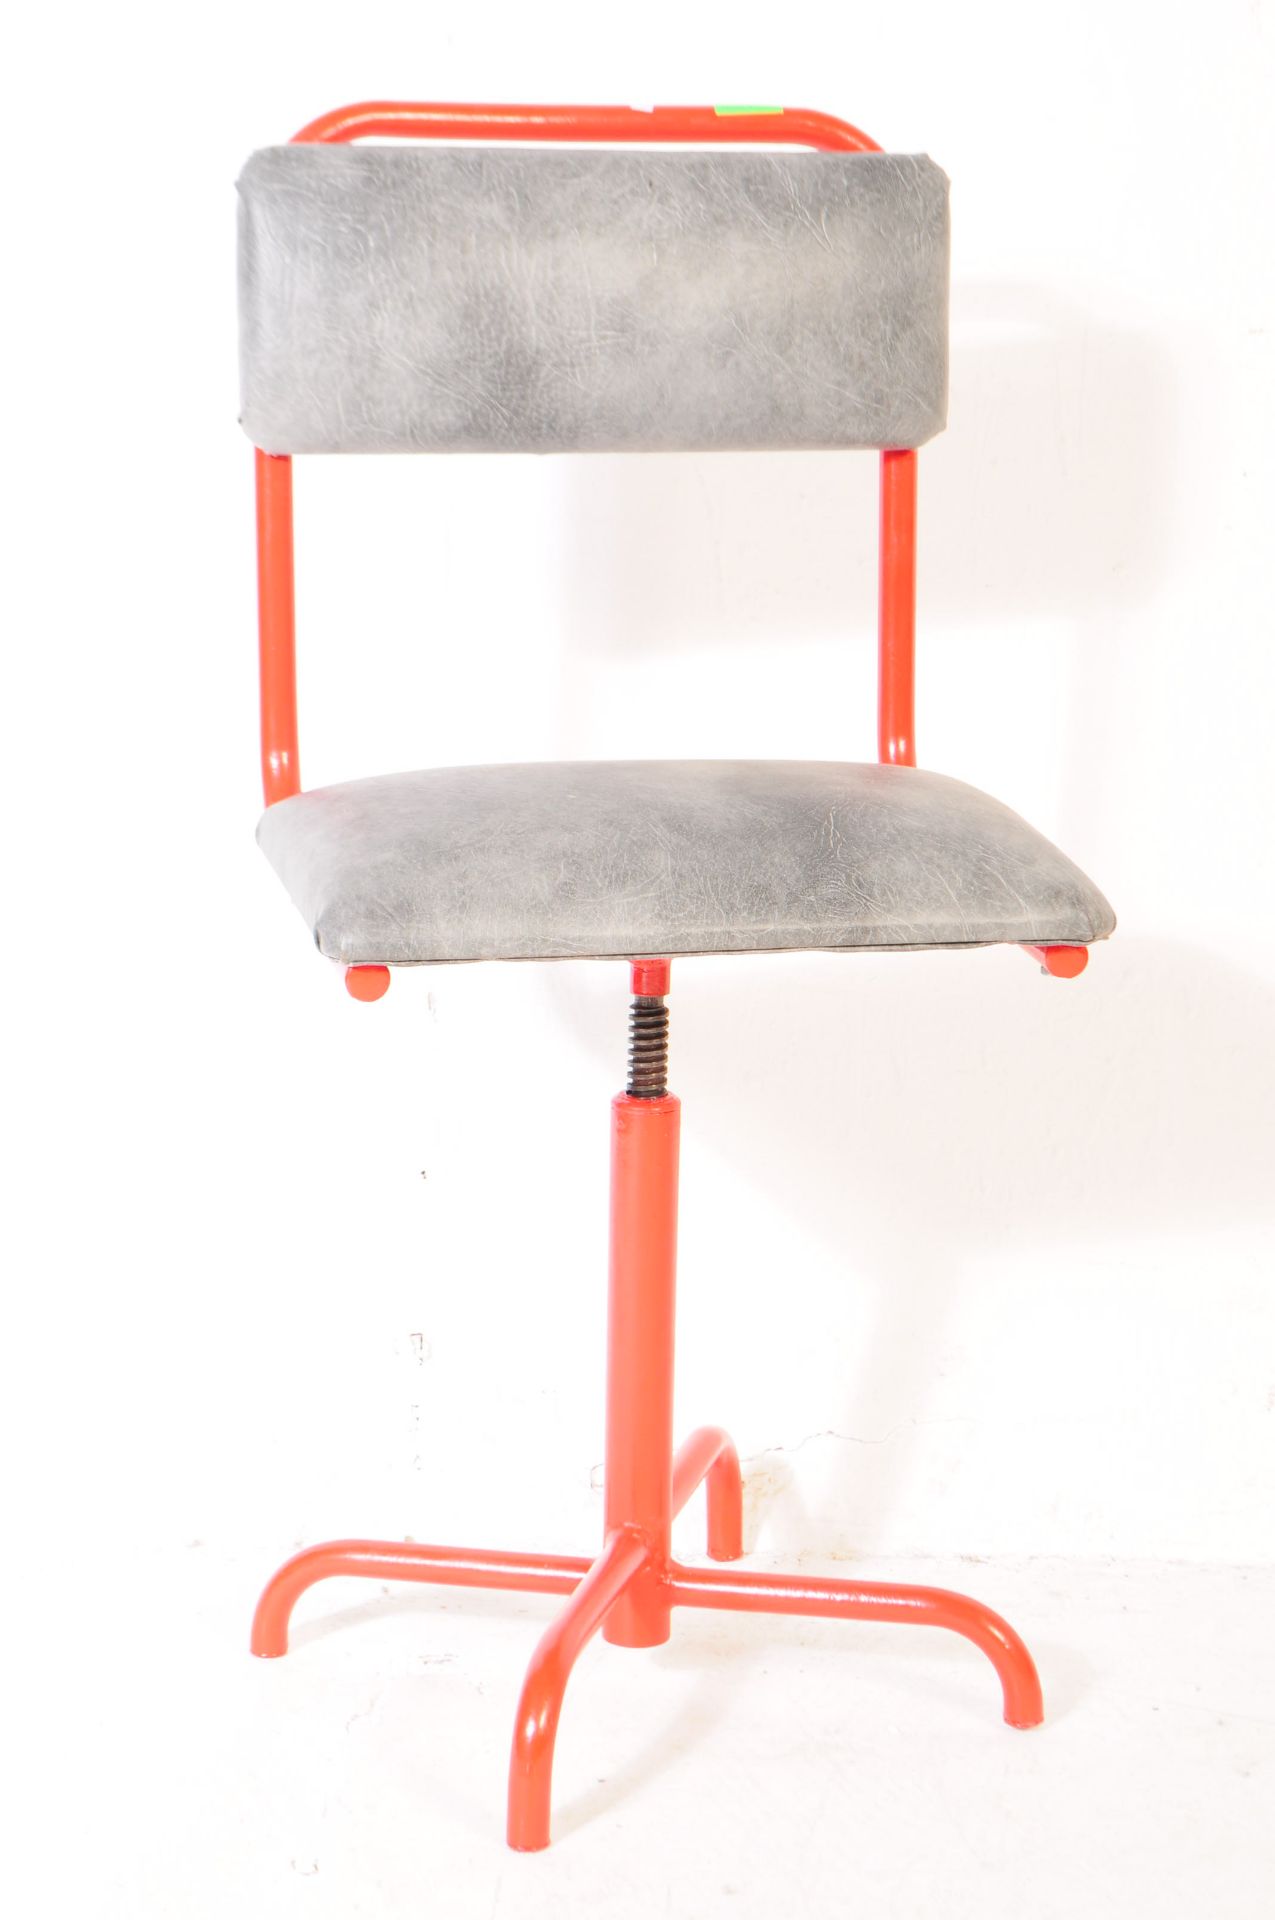 MID 20TH CENTURY METAL MACHINISTS WORK CHAIR